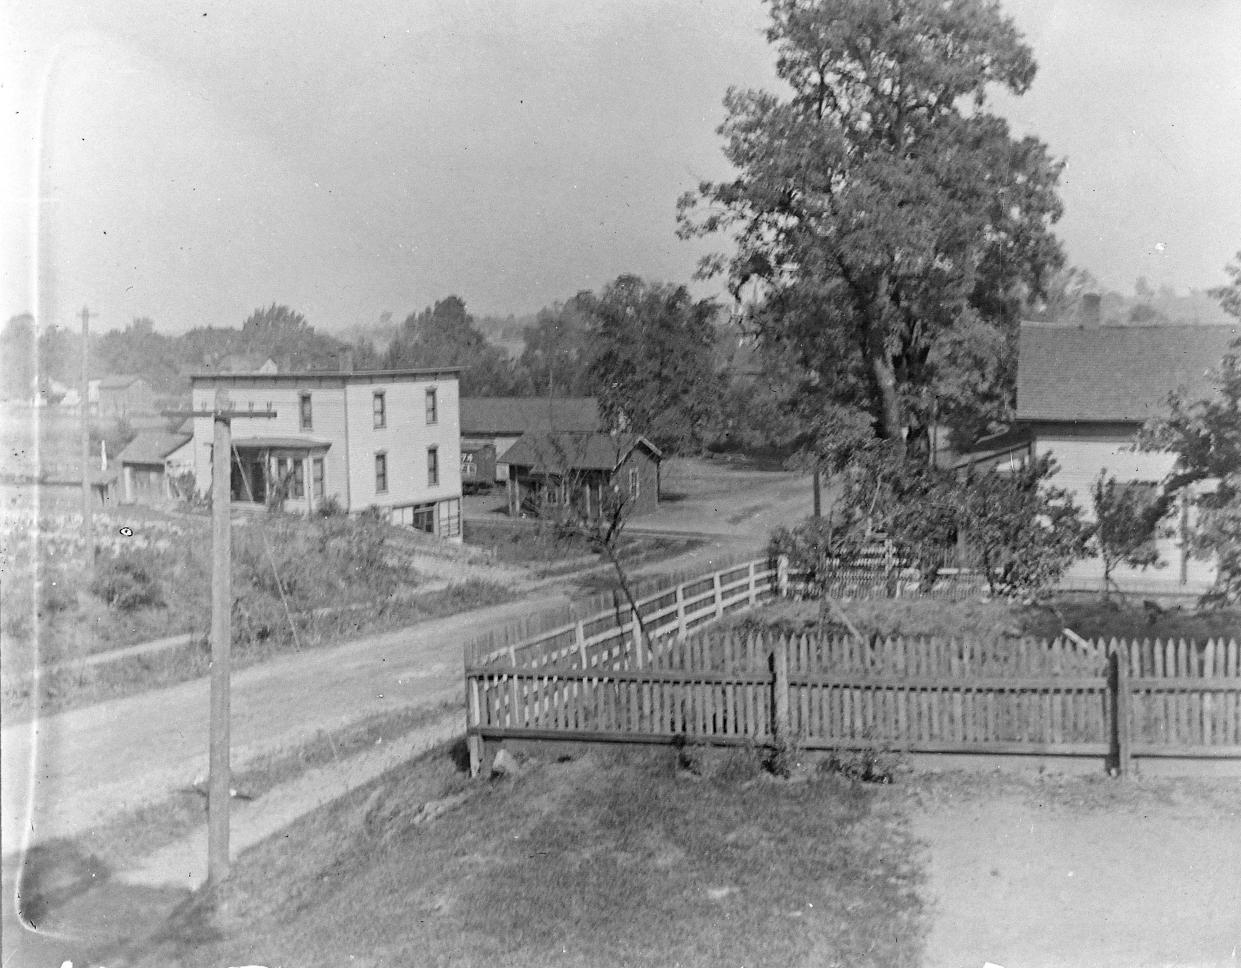 The Munroe Falls Historical Society helped identify this photo from the early 20th century. This view is looking north on North Main Street (Route 91) near Munroe Falls Avenue. The building at the top left still stands near the railroad tracks. It's the Scissor Room at 21 N. Main St.